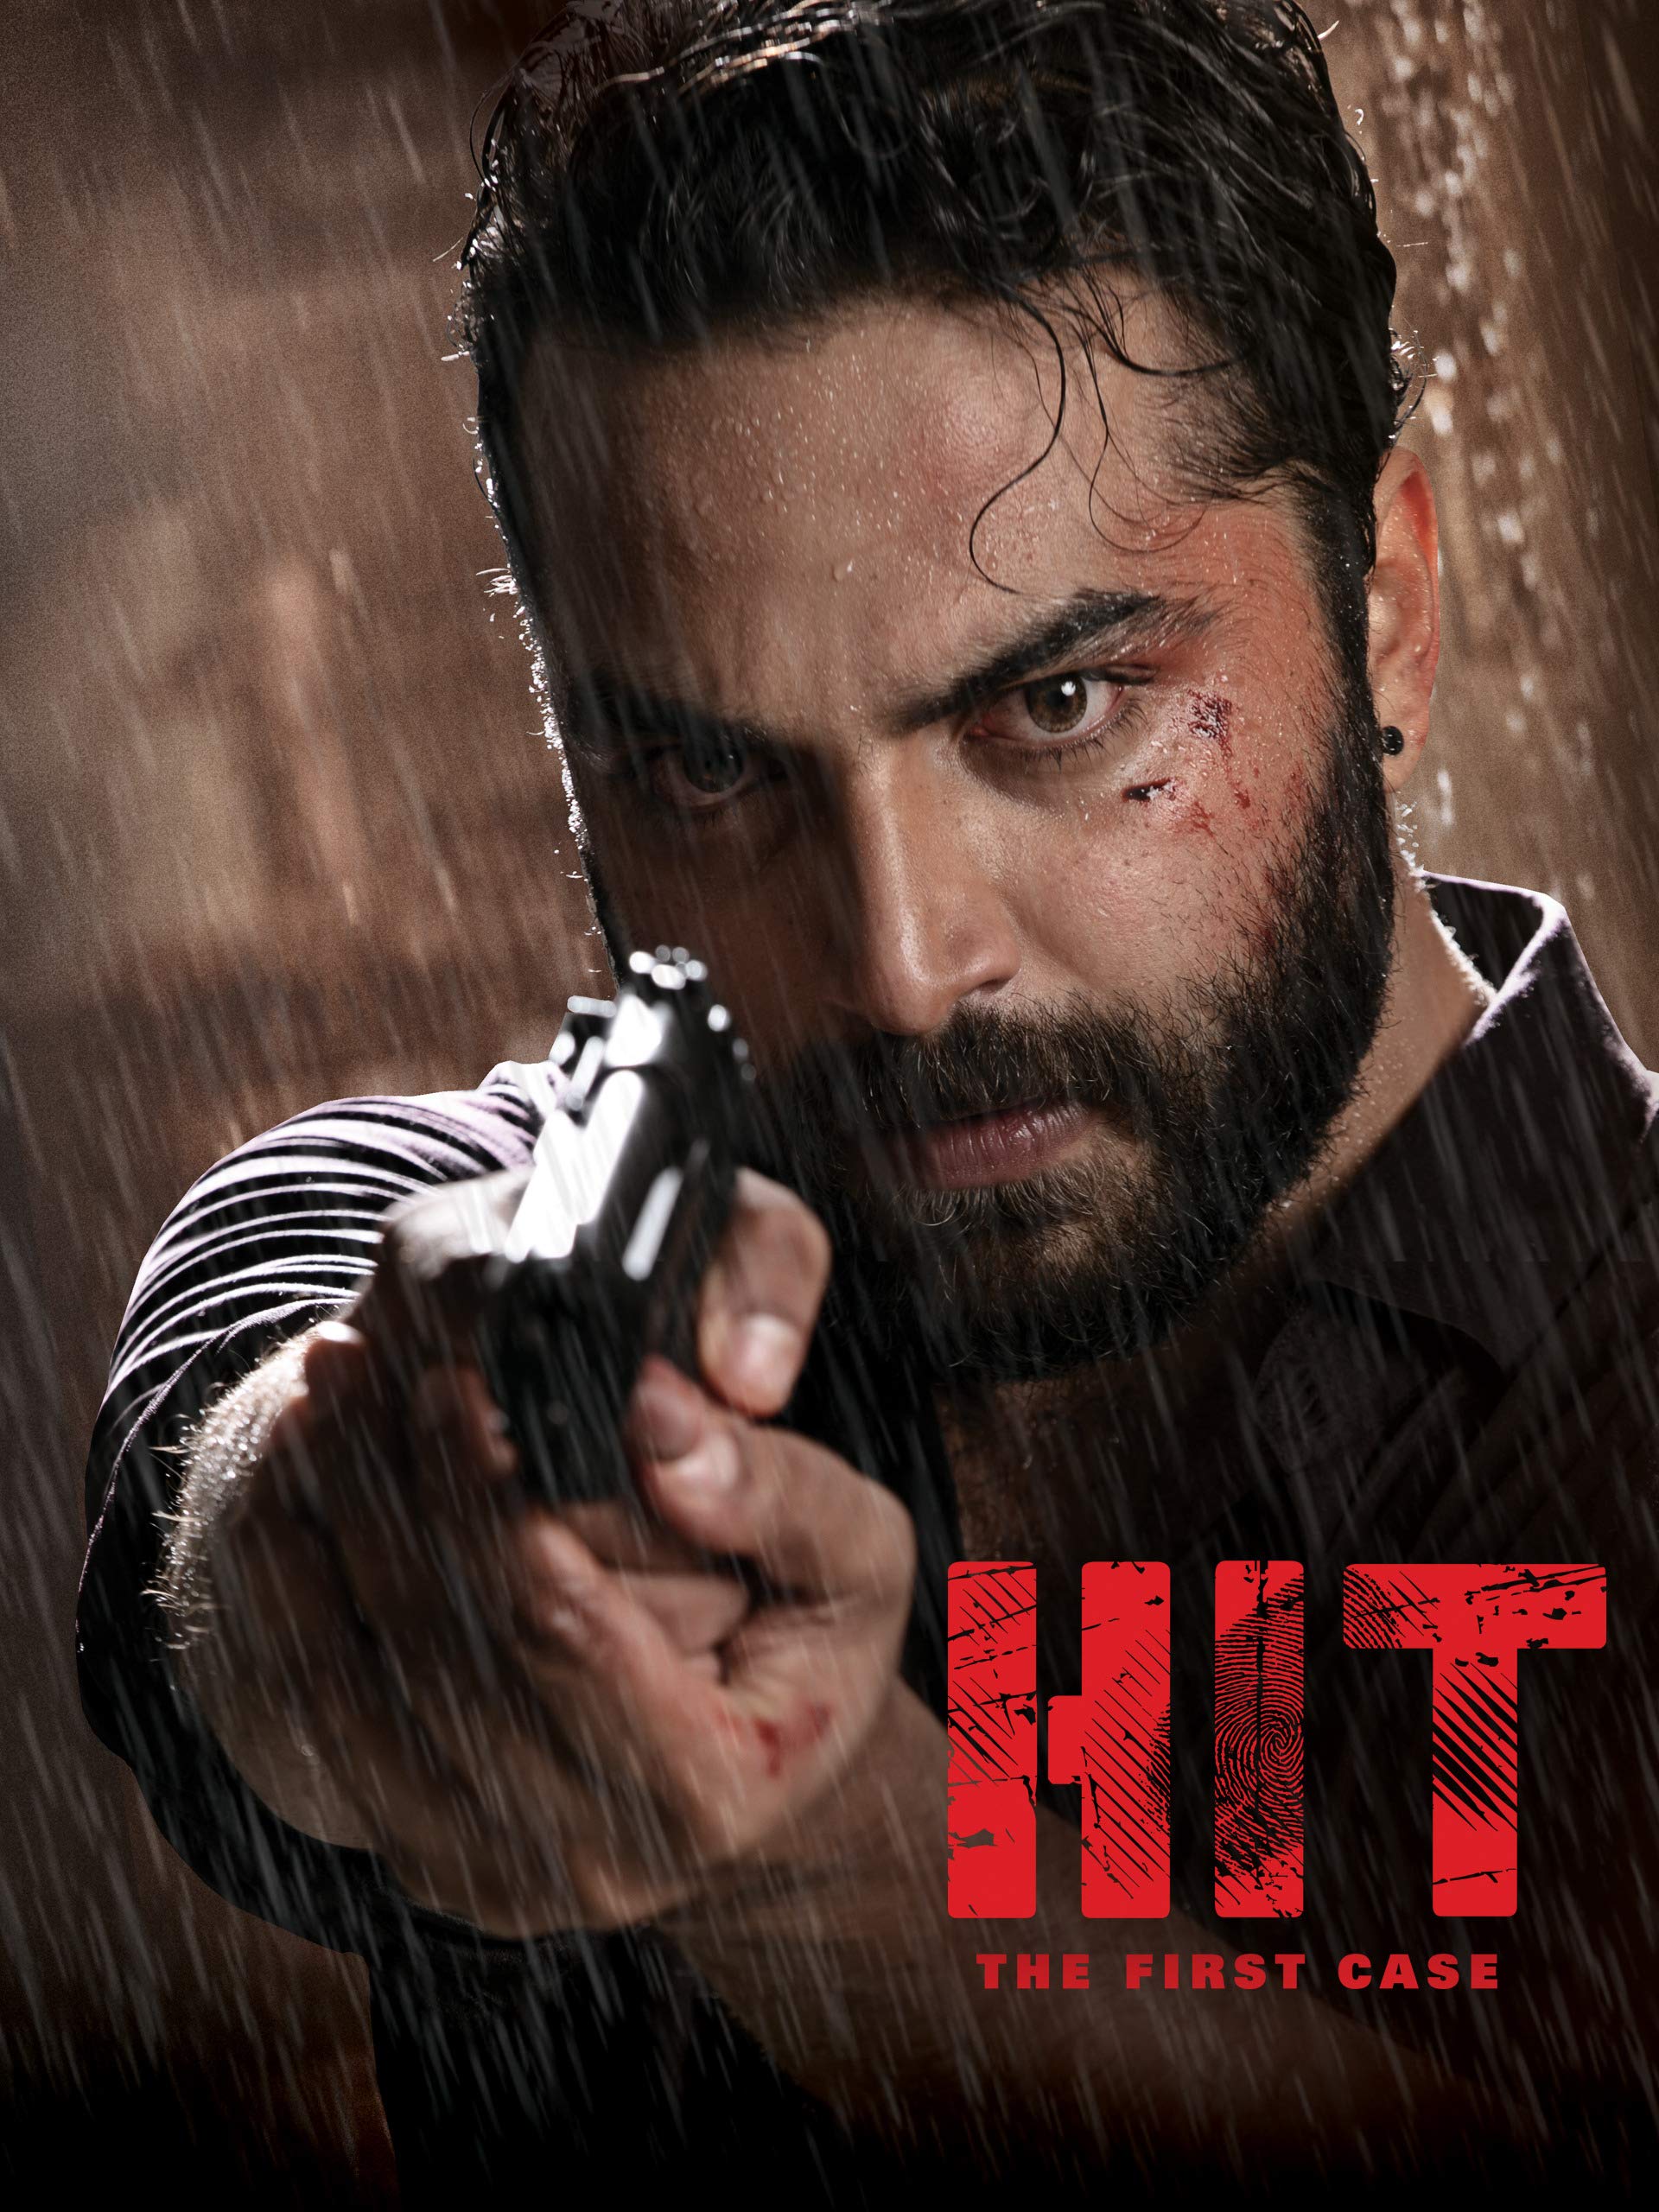 Hit – The First Case 2020 Hindi Dubbed ORG UNCUT 1080p HDRip ESub 1.9GB Download